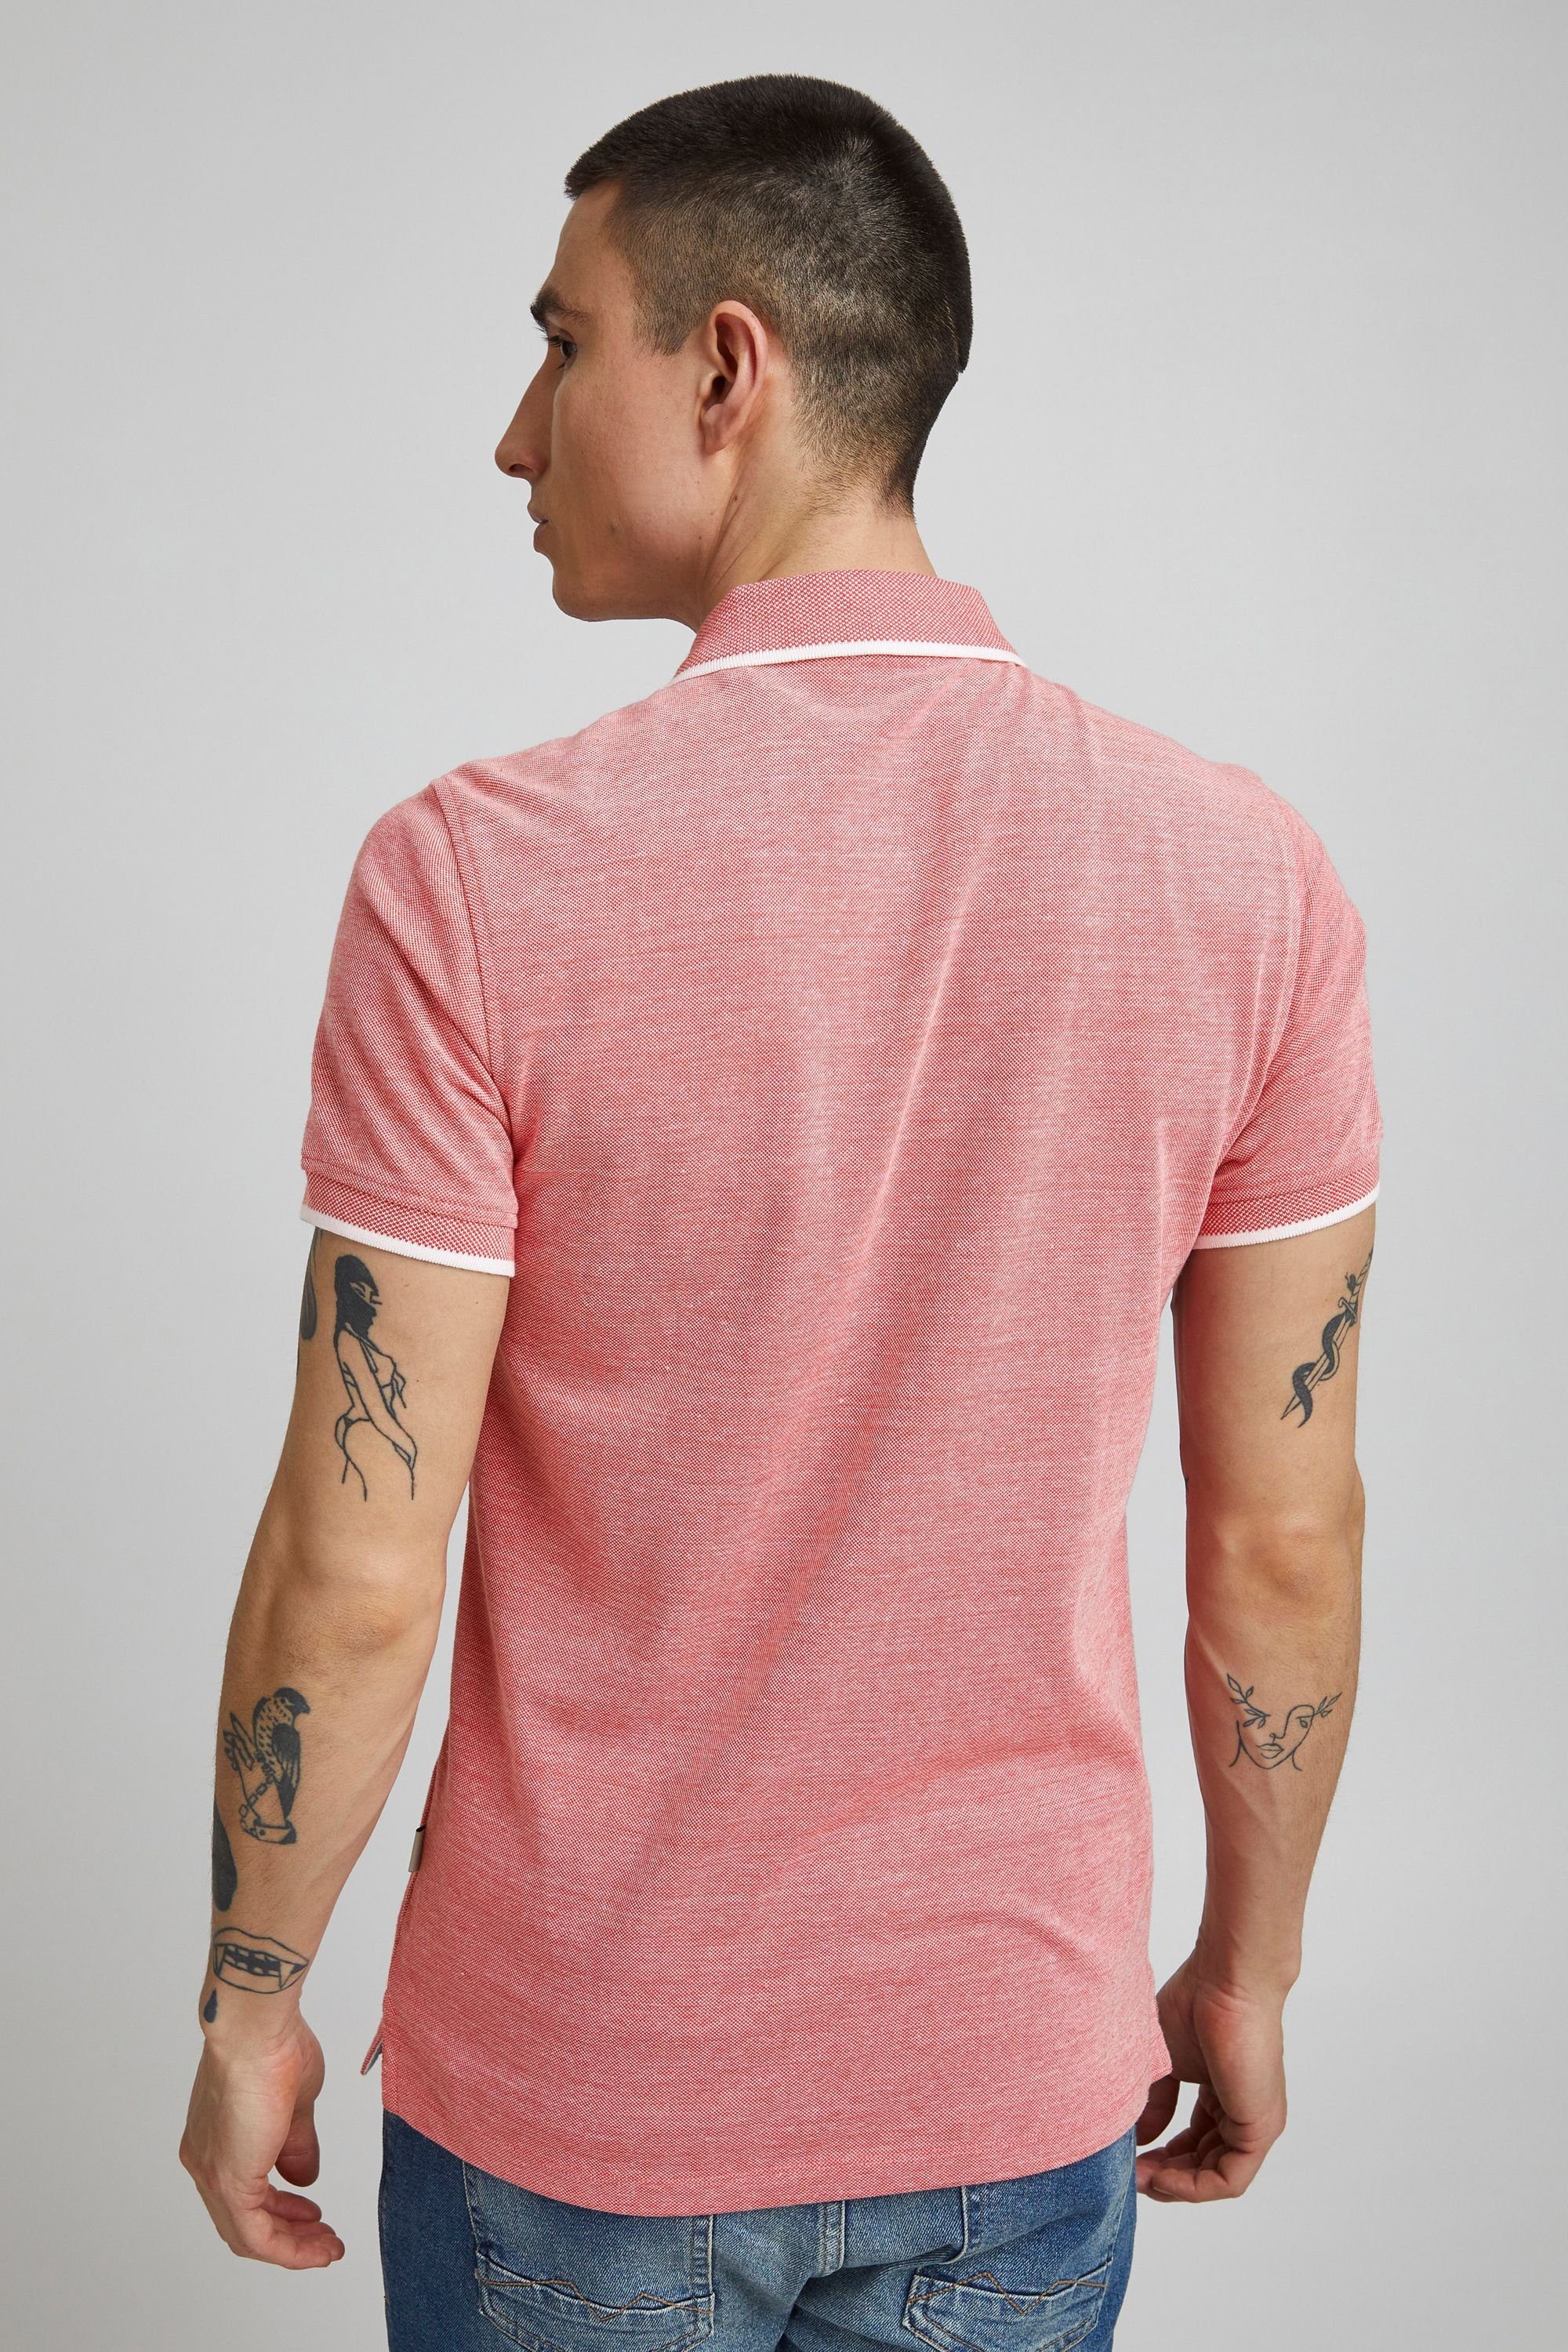 Red Project Project PRRasmus Mineral 11 11 Poloshirt